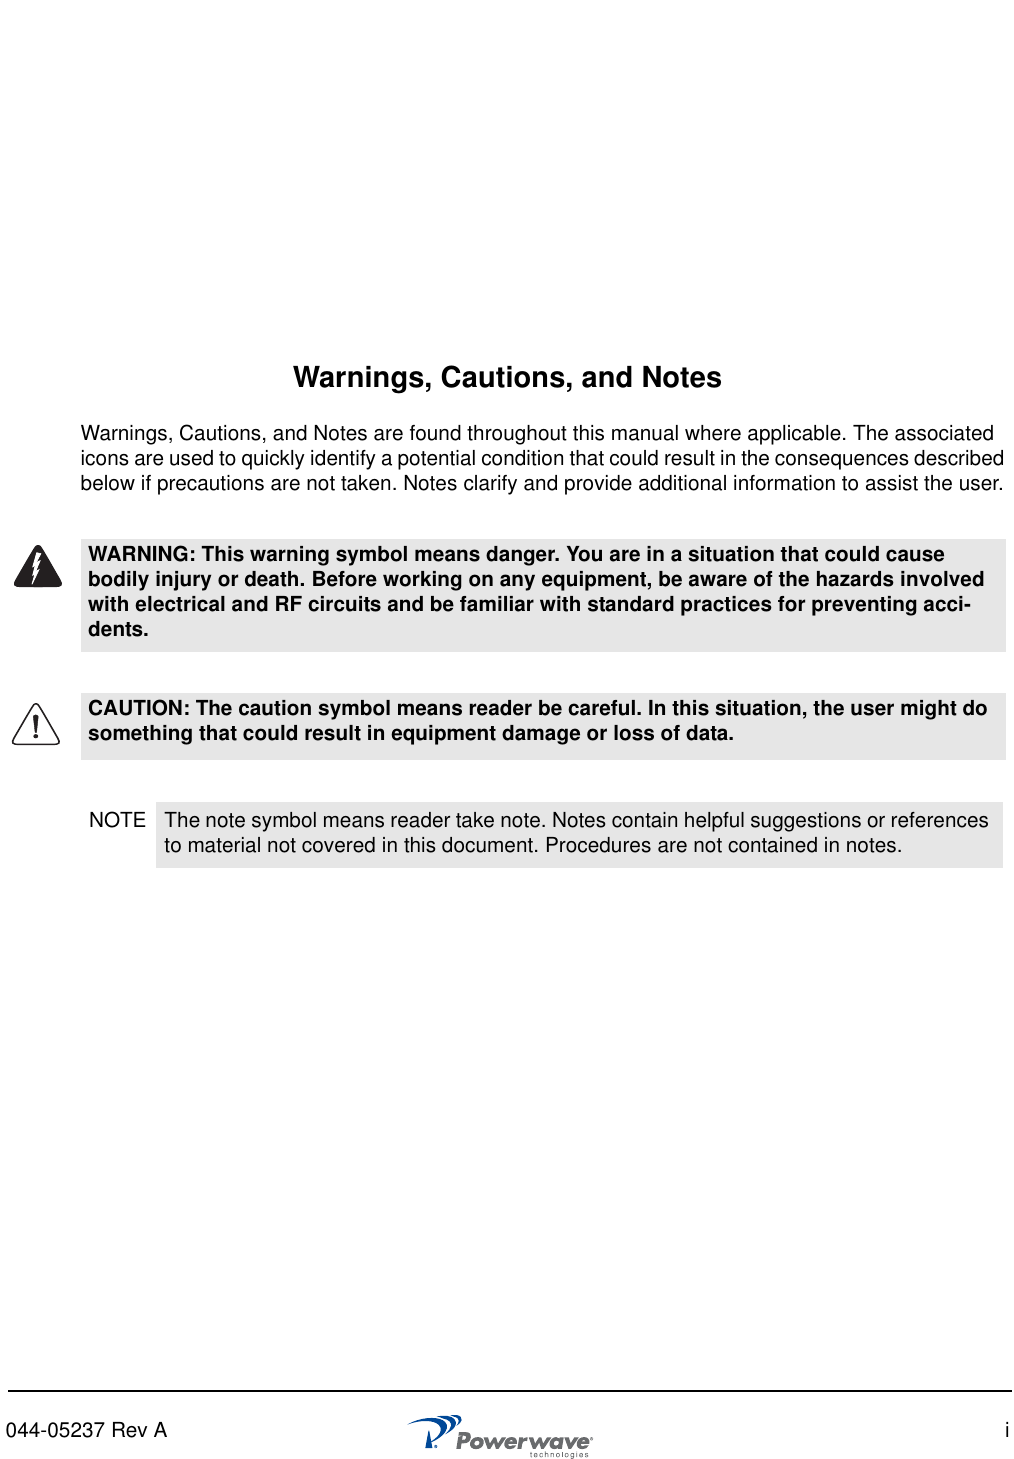 044-05237 Rev A iWarnings, Cautions, and NotesWarnings, Cautions, and Notes are found throughout this manual where applicable. The associated icons are used to quickly identify a potential condition that could result in the consequences described below if precautions are not taken. Notes clarify and provide additional information to assist the user.WARNING: This warning symbol means danger. You are in a situation that could cause bodily injury or death. Before working on any equipment, be aware of the hazards involved with electrical and RF circuits and be familiar with standard practices for preventing acci-dents.CAUTION: The caution symbol means reader be careful. In this situation, the user might do something that could result in equipment damage or loss of data. NOTE The note symbol means reader take note. Notes contain helpful suggestions or references to material not covered in this document. Procedures are not contained in notes. 